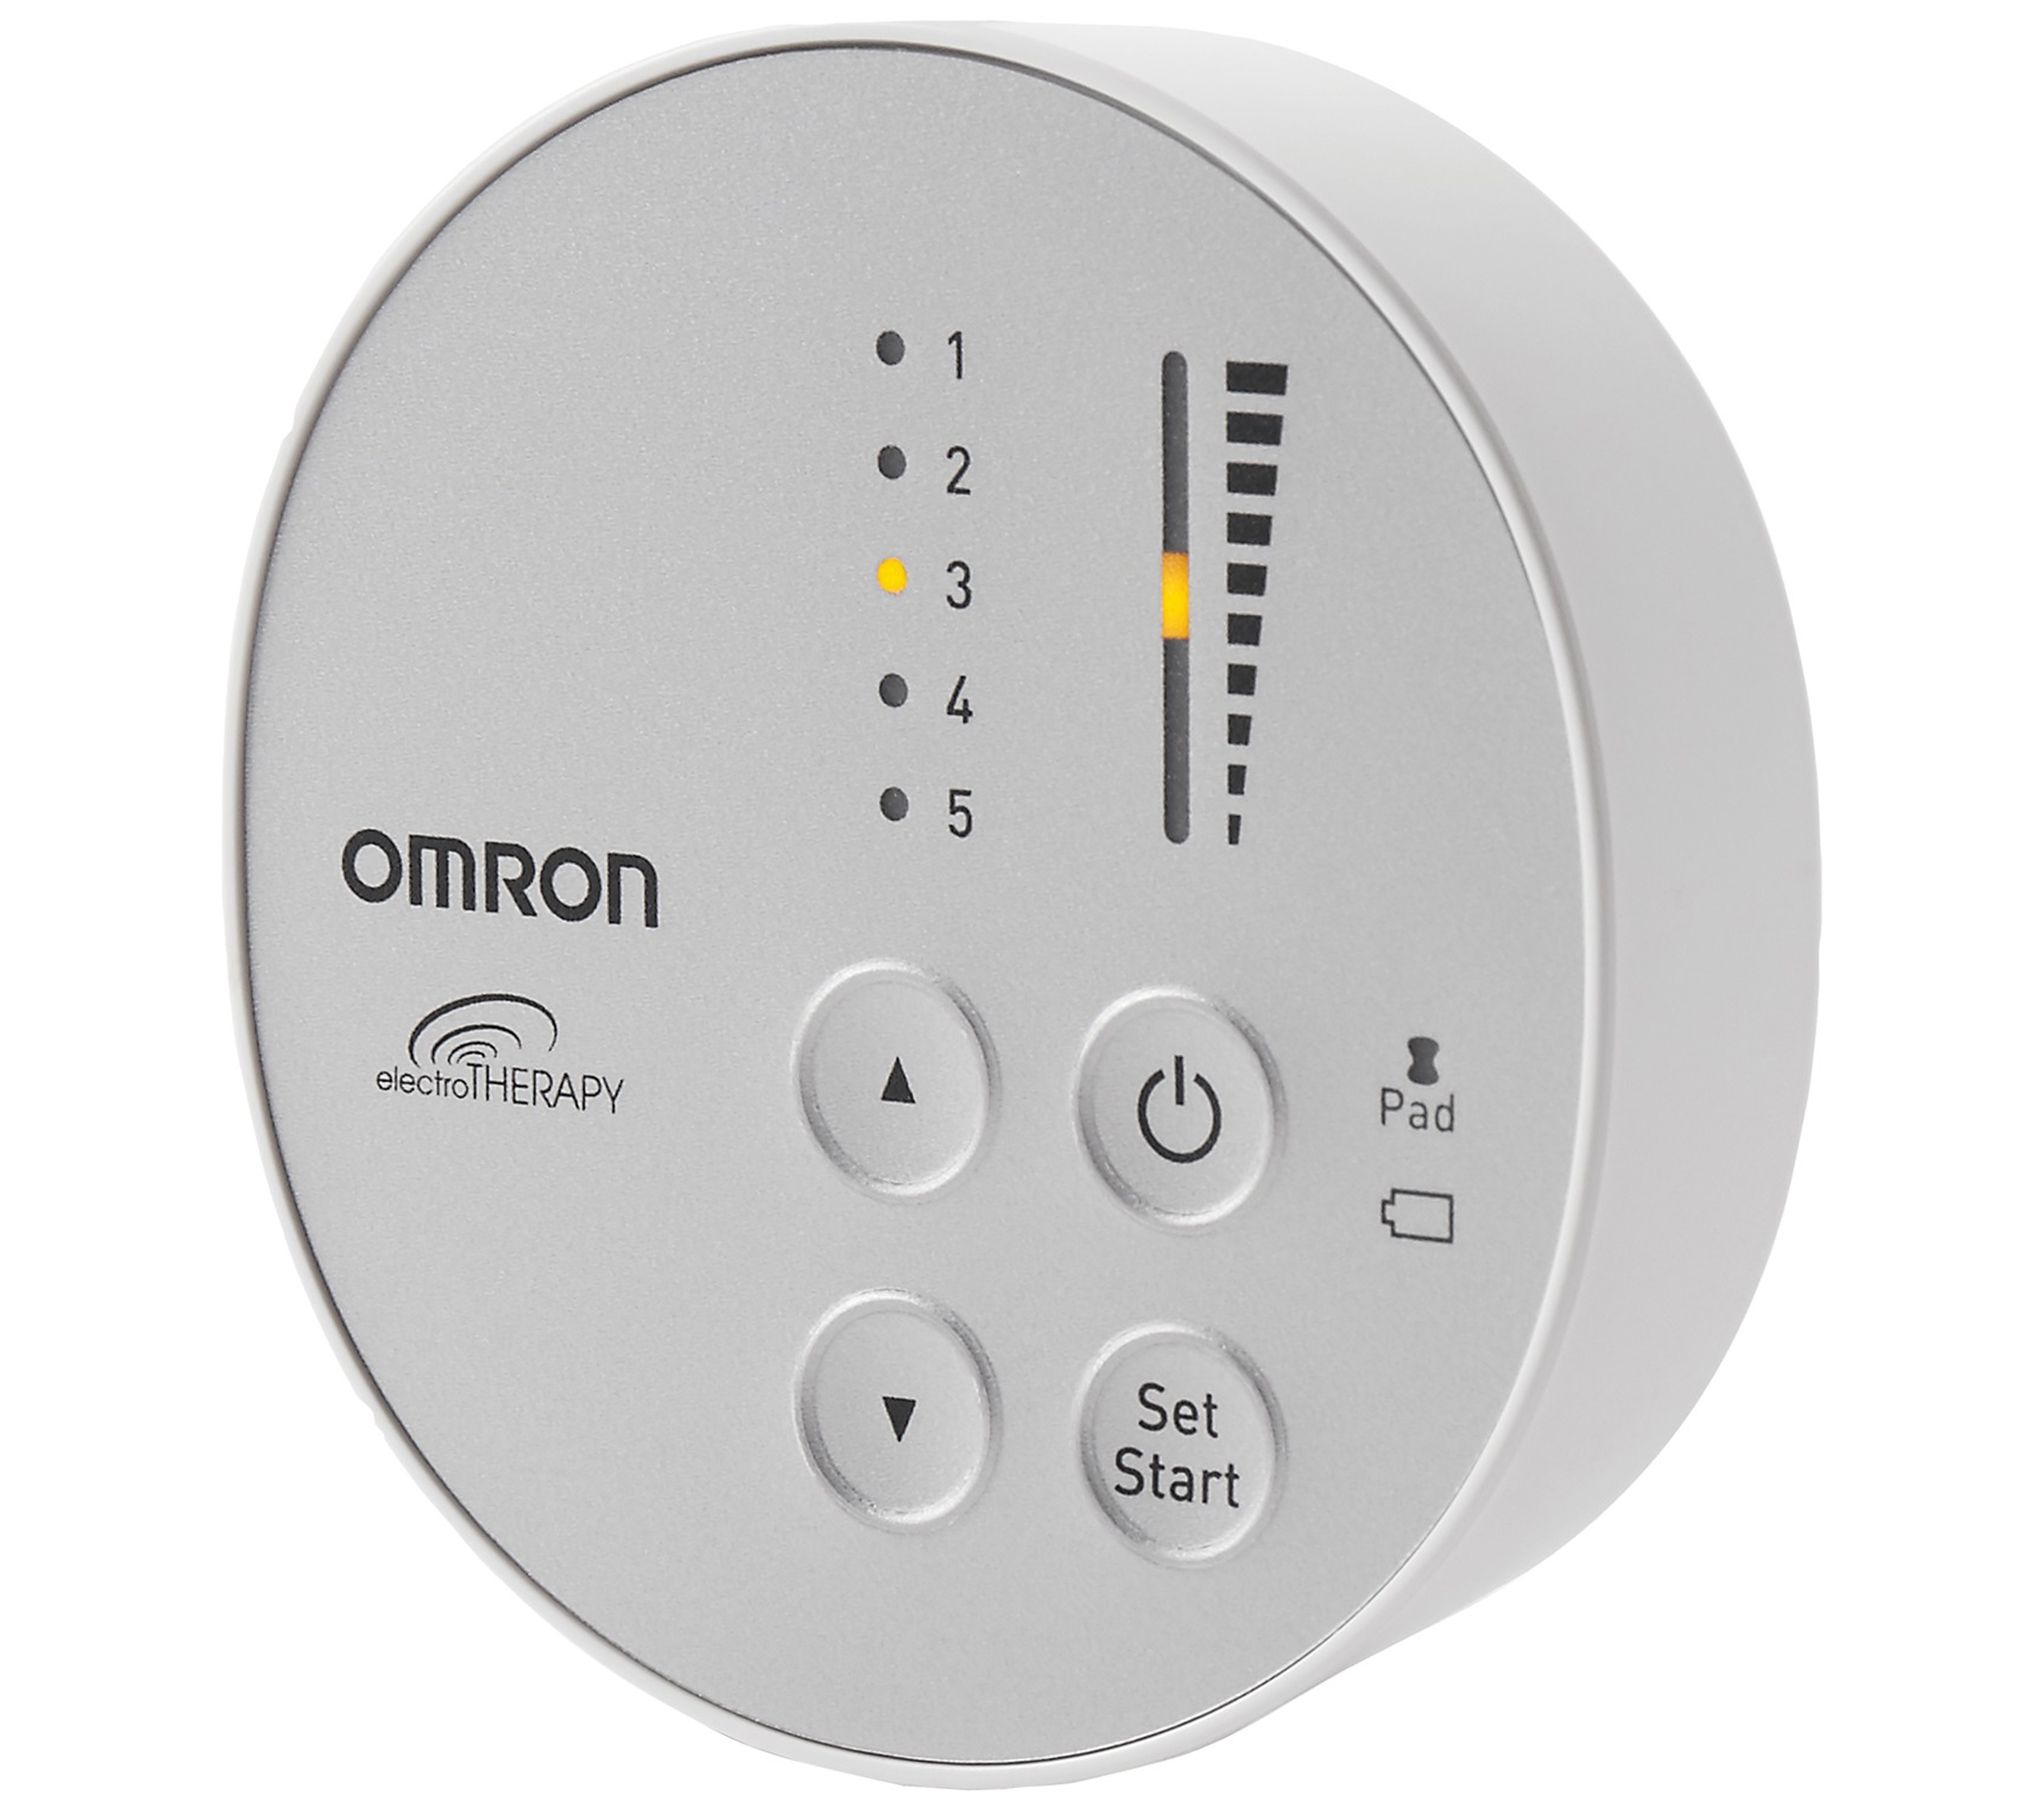 Omron Tens Therapy Device HVF013